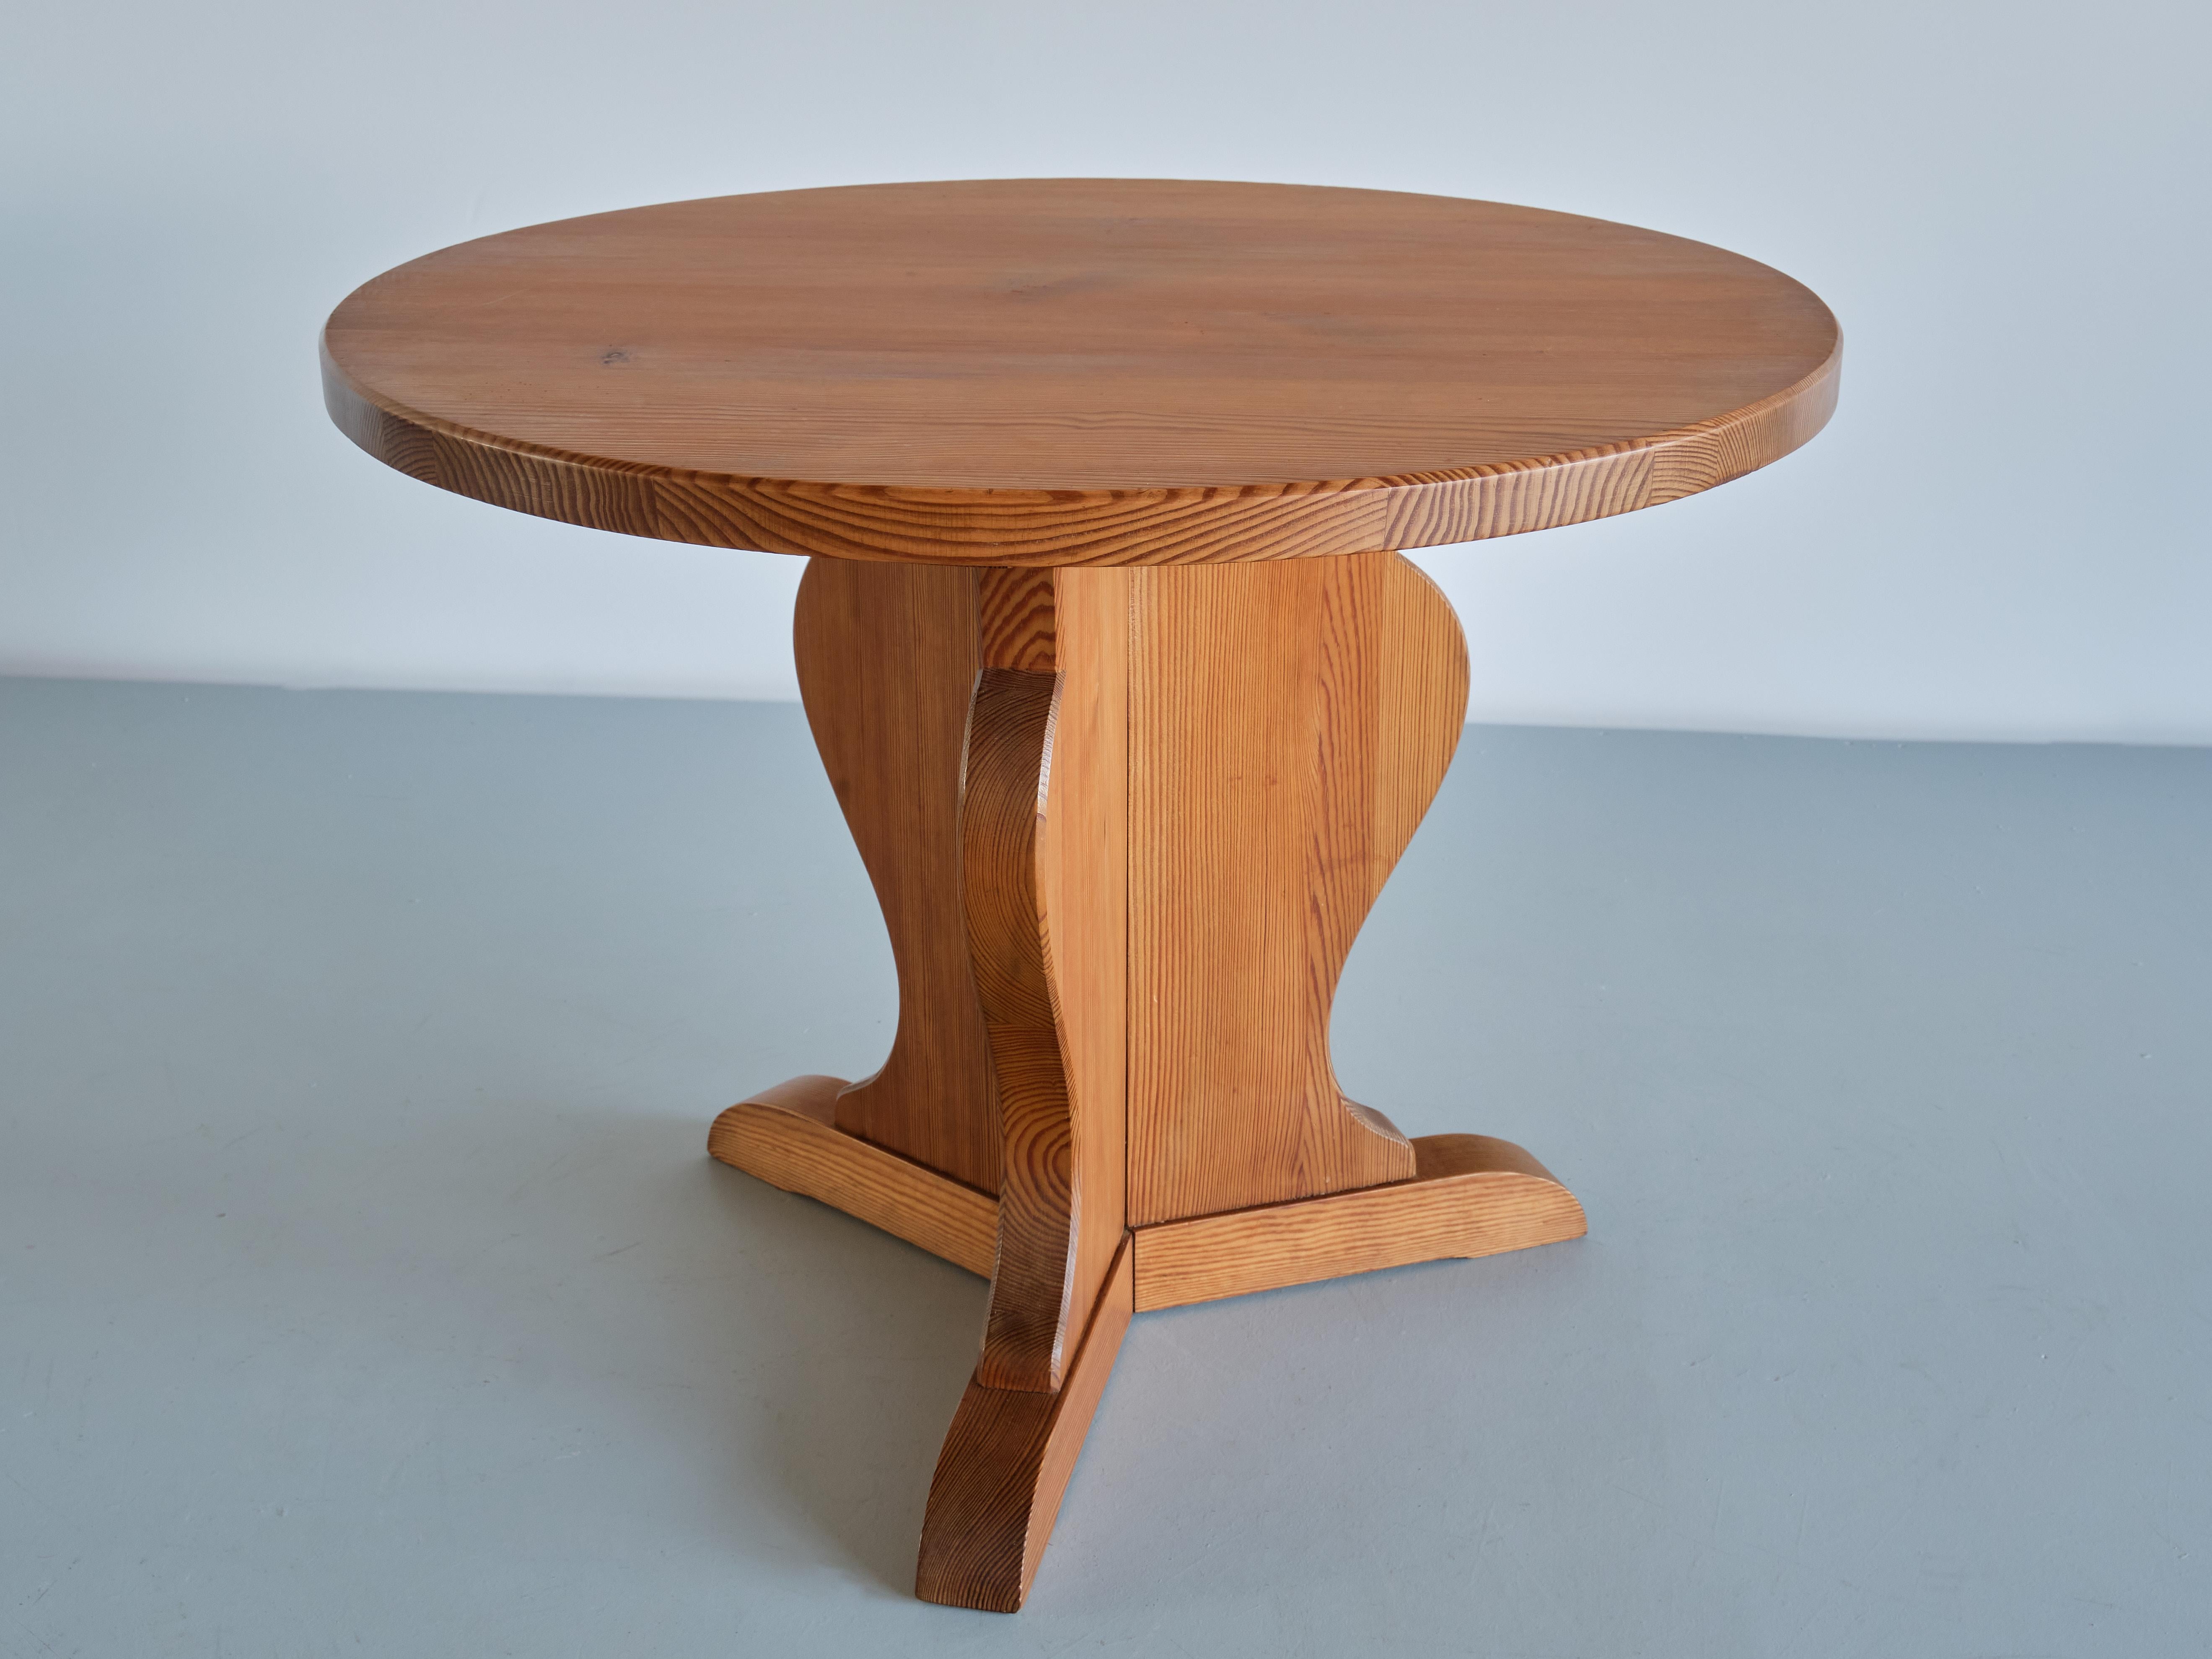 This occasional or side table was produced by Nordiska Kompaniet in the late 1930s. Made of solid pine, the round top is resting on three cleverly constructed legs that meet up in the center. The amphora-shaped base is a reference to the